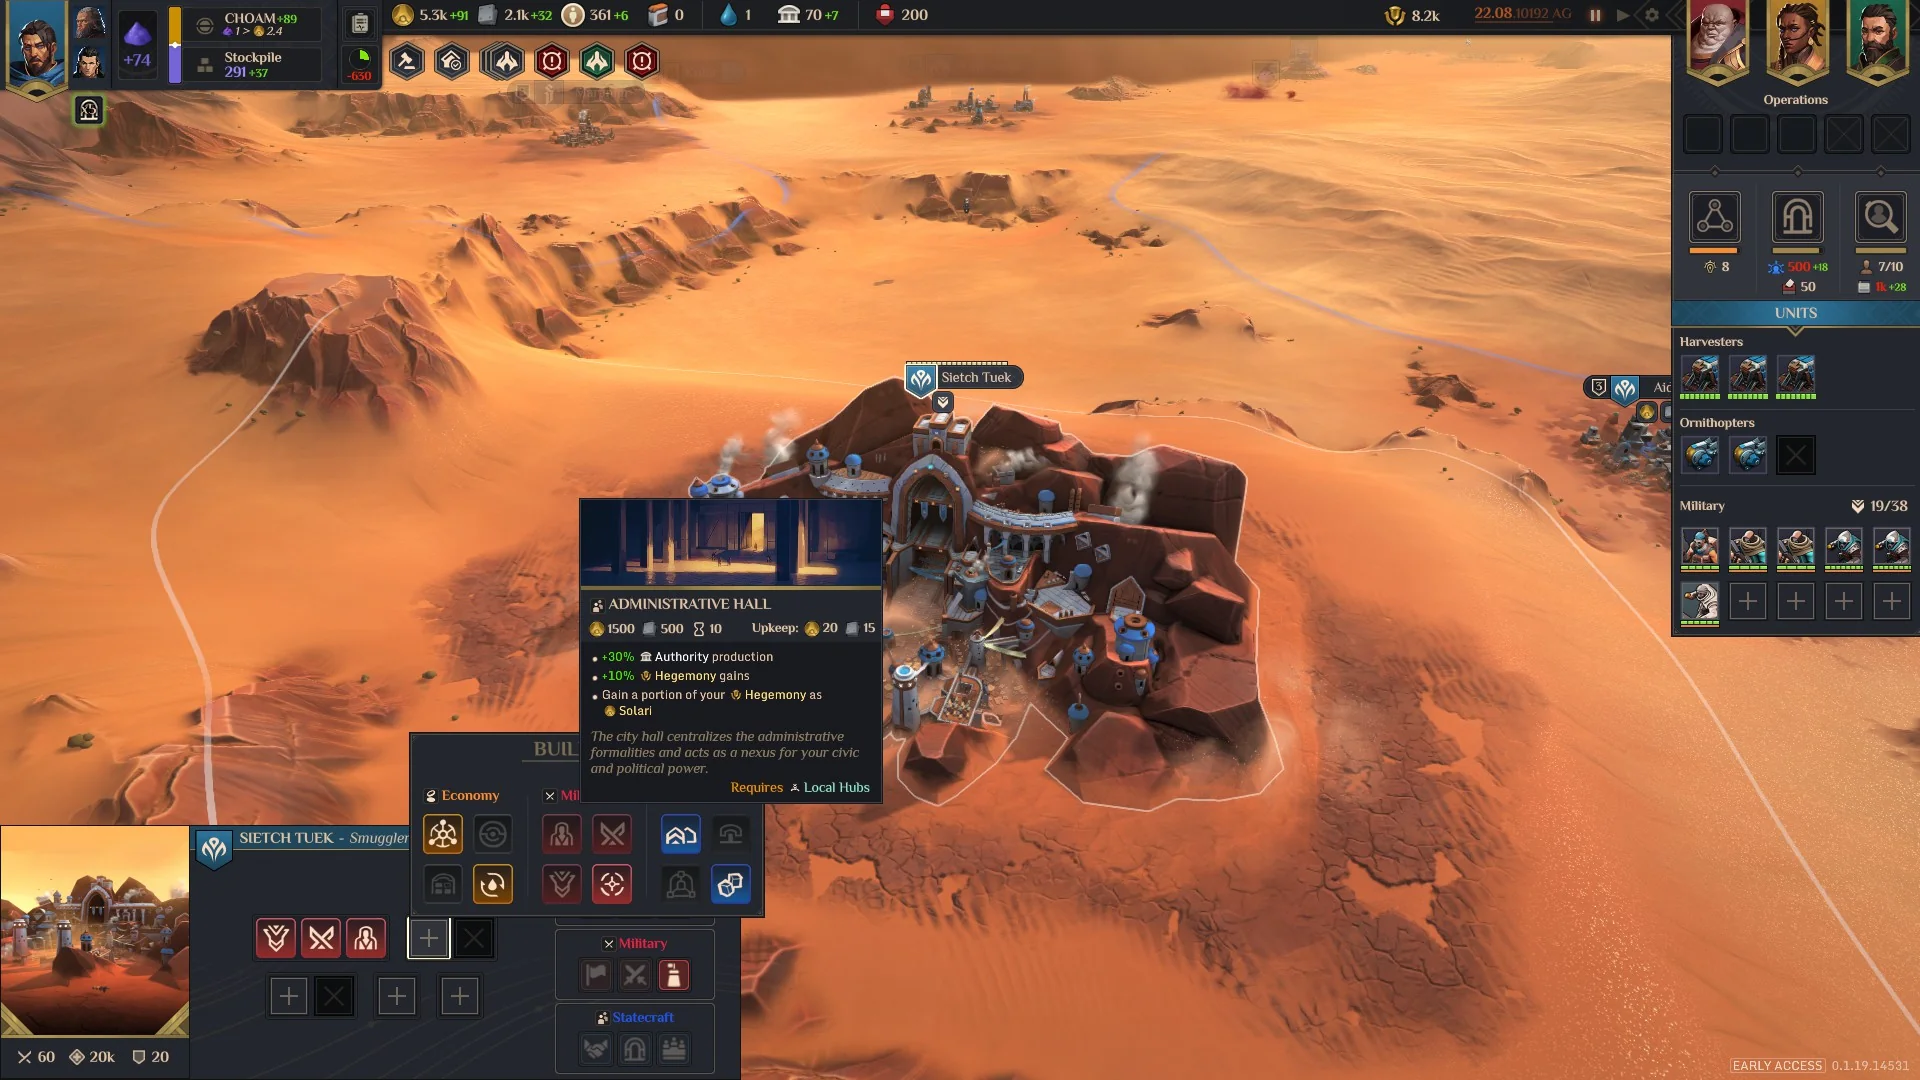 Dune Spice Wars - Administration Hall Building Benefits